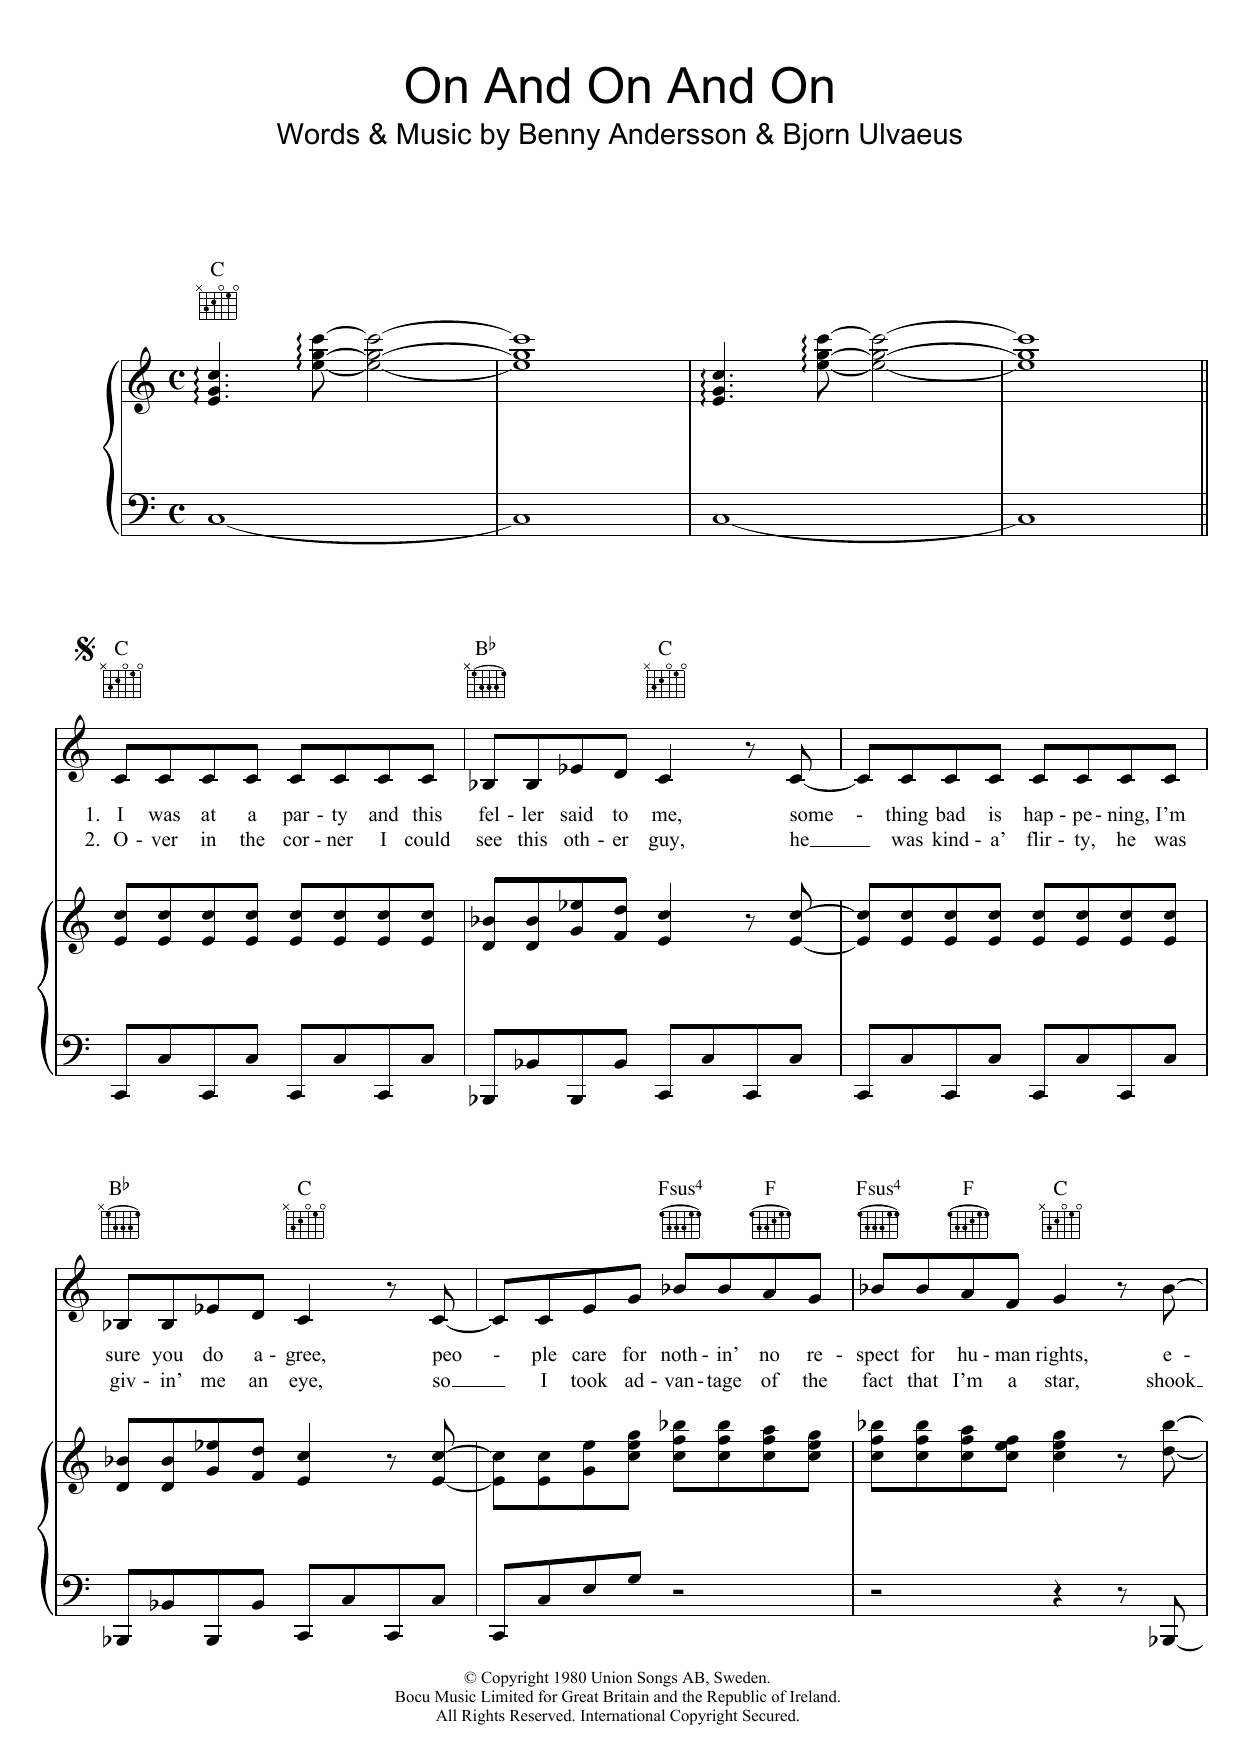 Download ABBA On And On And On Sheet Music